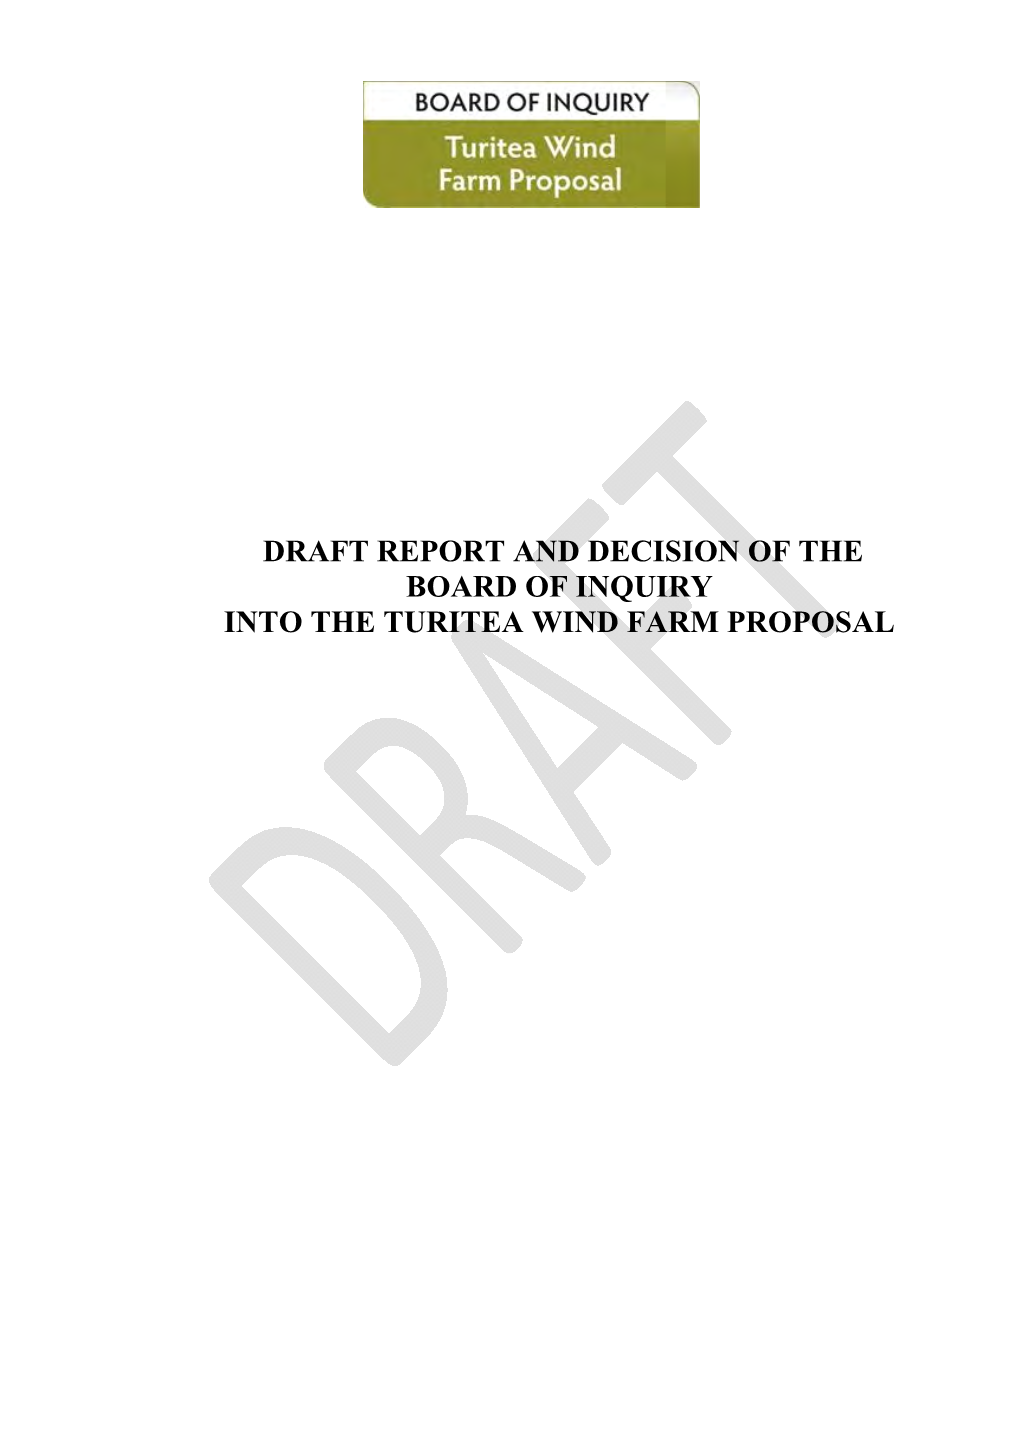 Draft Report and Decision of the Board of Inquiry Into the Turitea Wind Farm Proposal